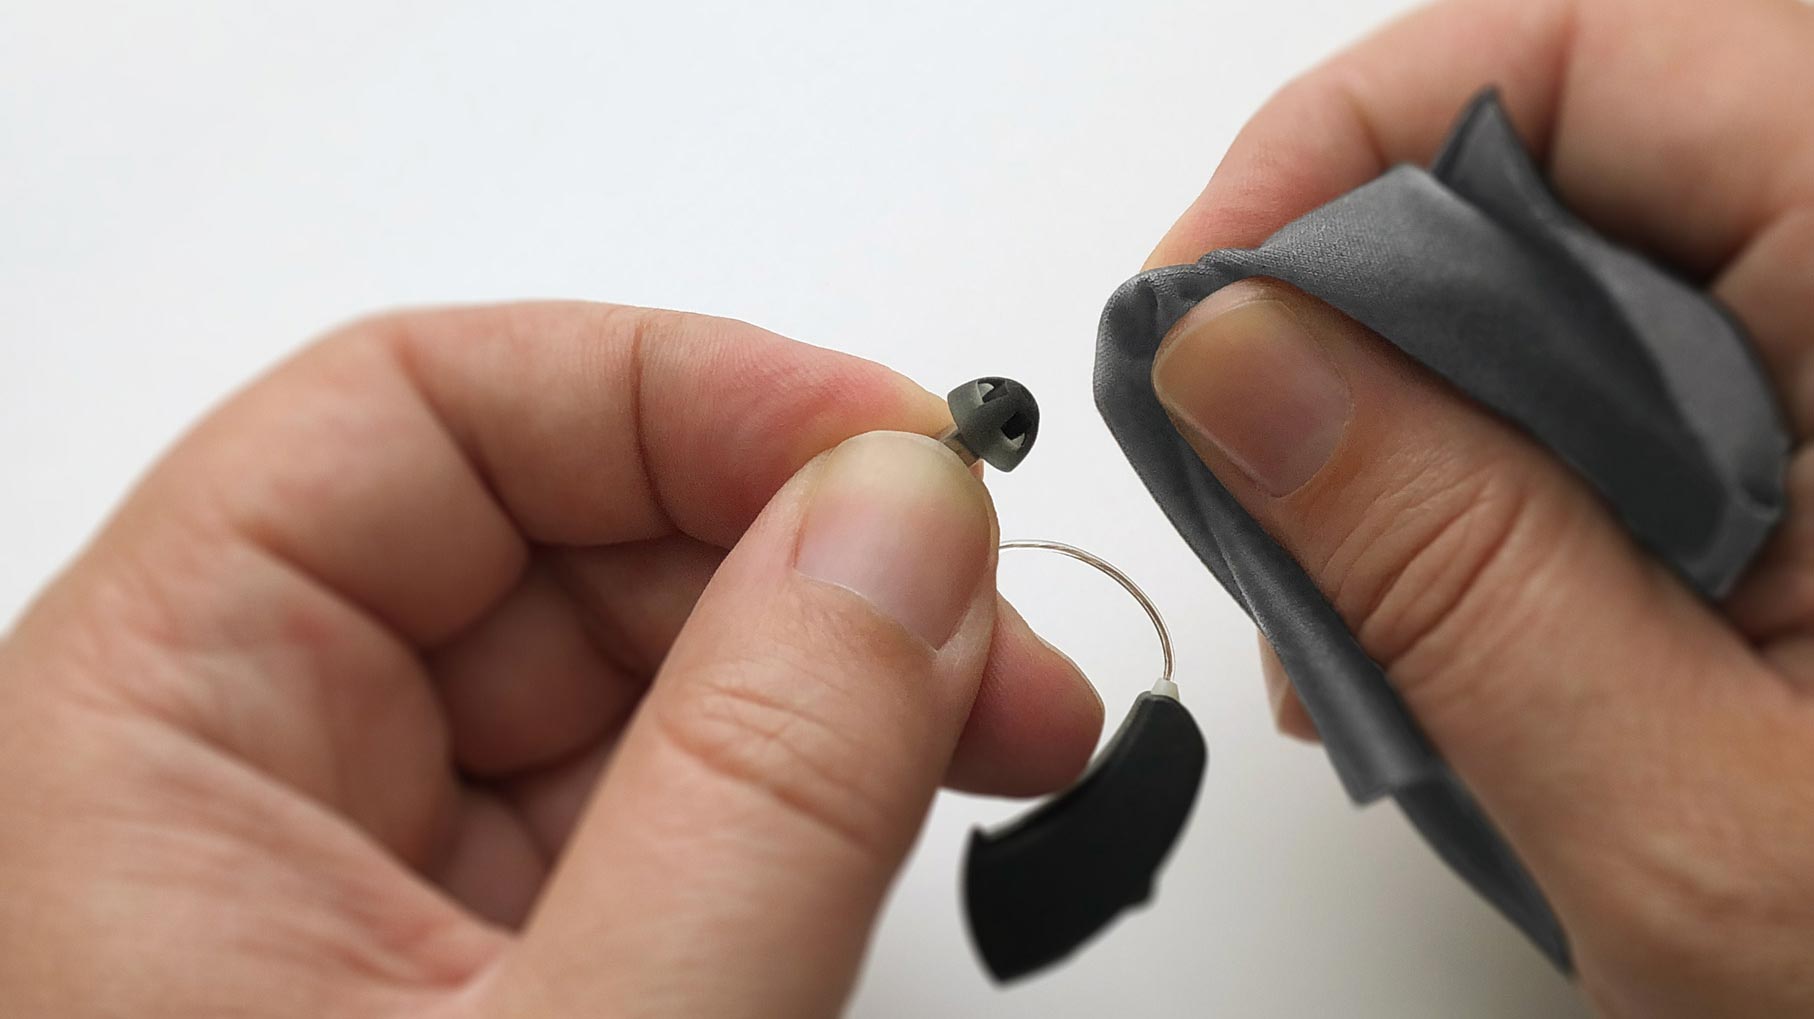 How to clean hearing aids &  more maintenance tips